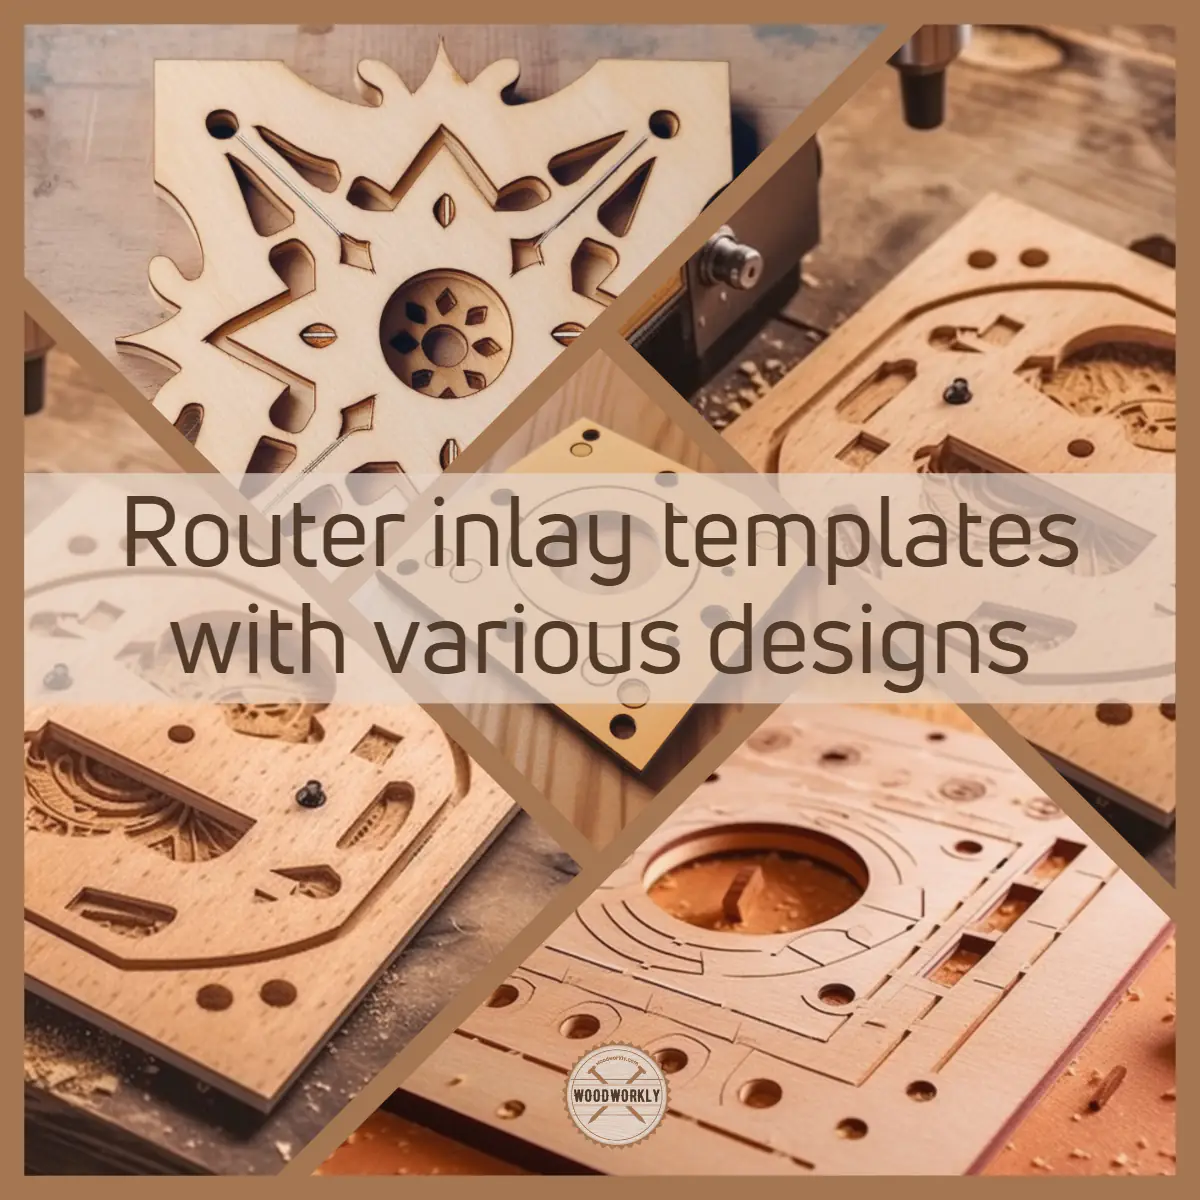 Router inlay templates with various designs